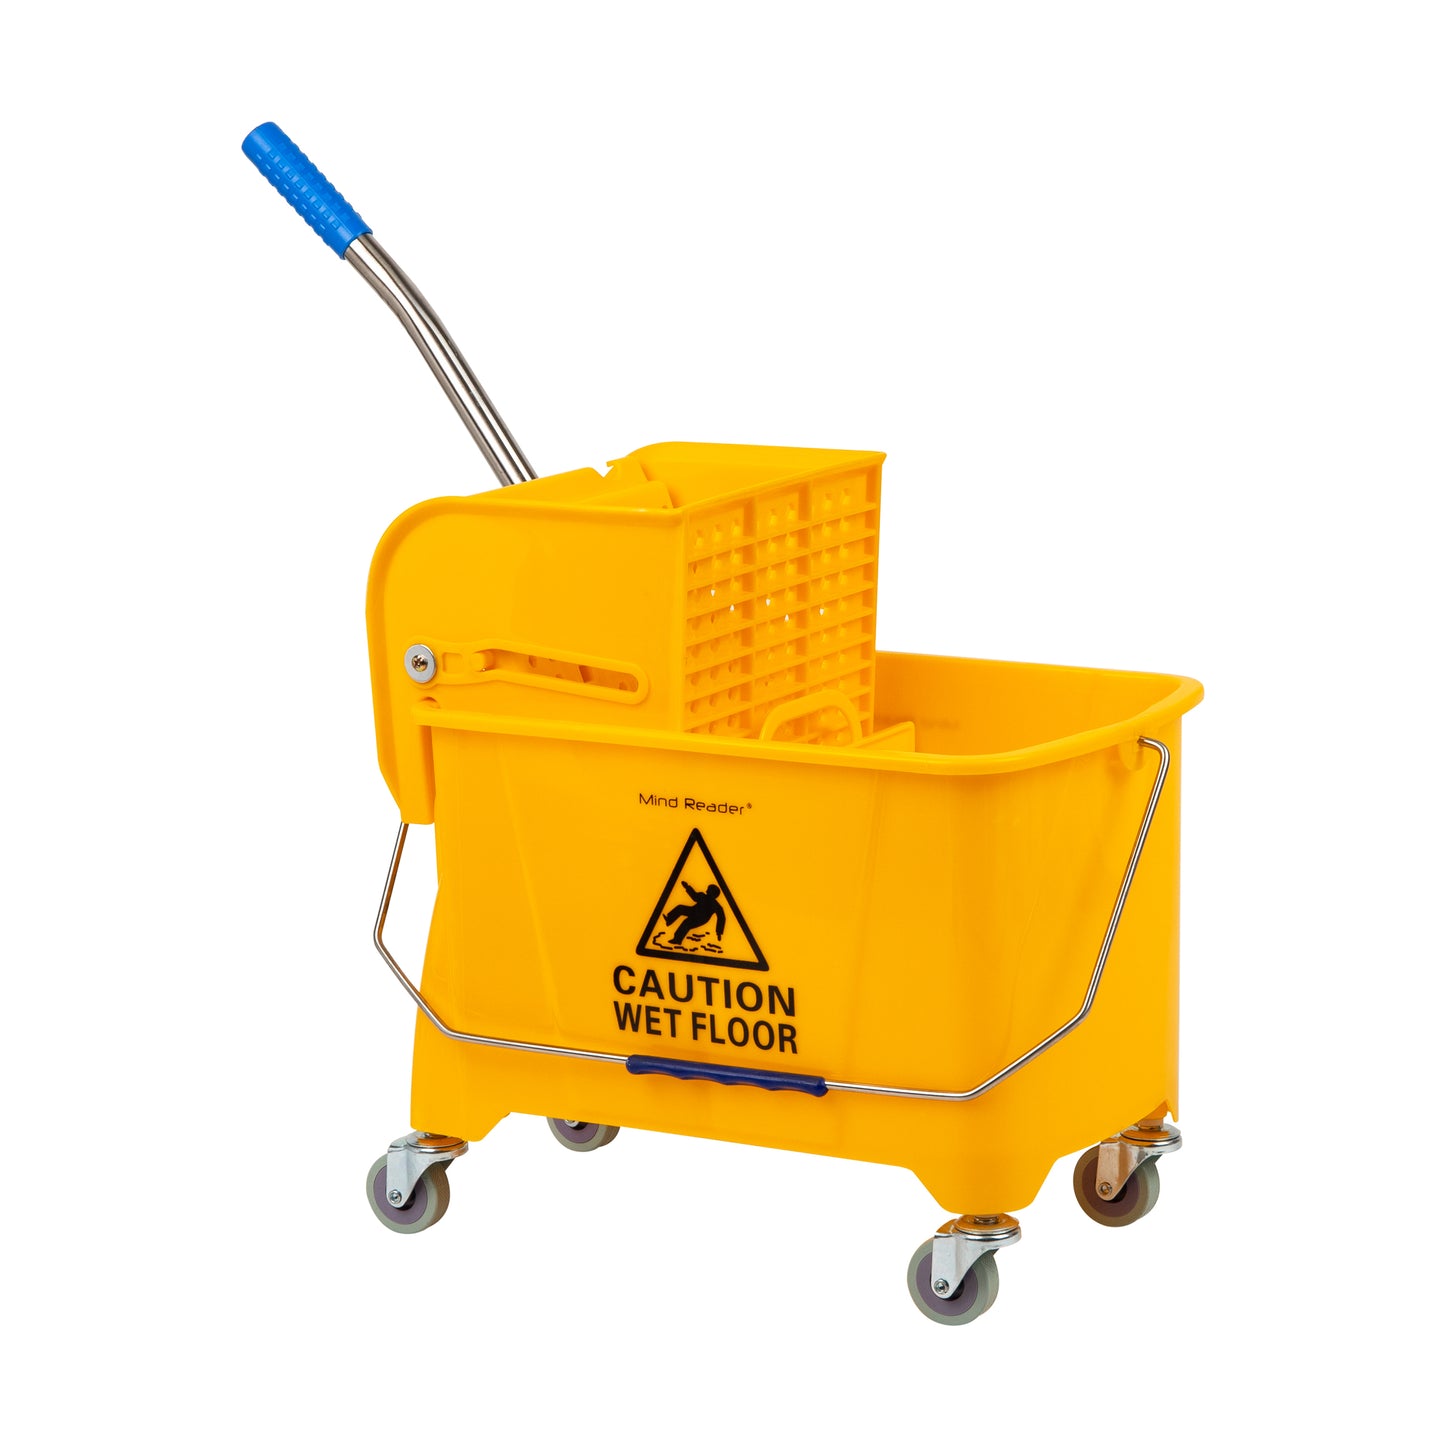 1pc Pp+tpr Foldable Mop Bucket